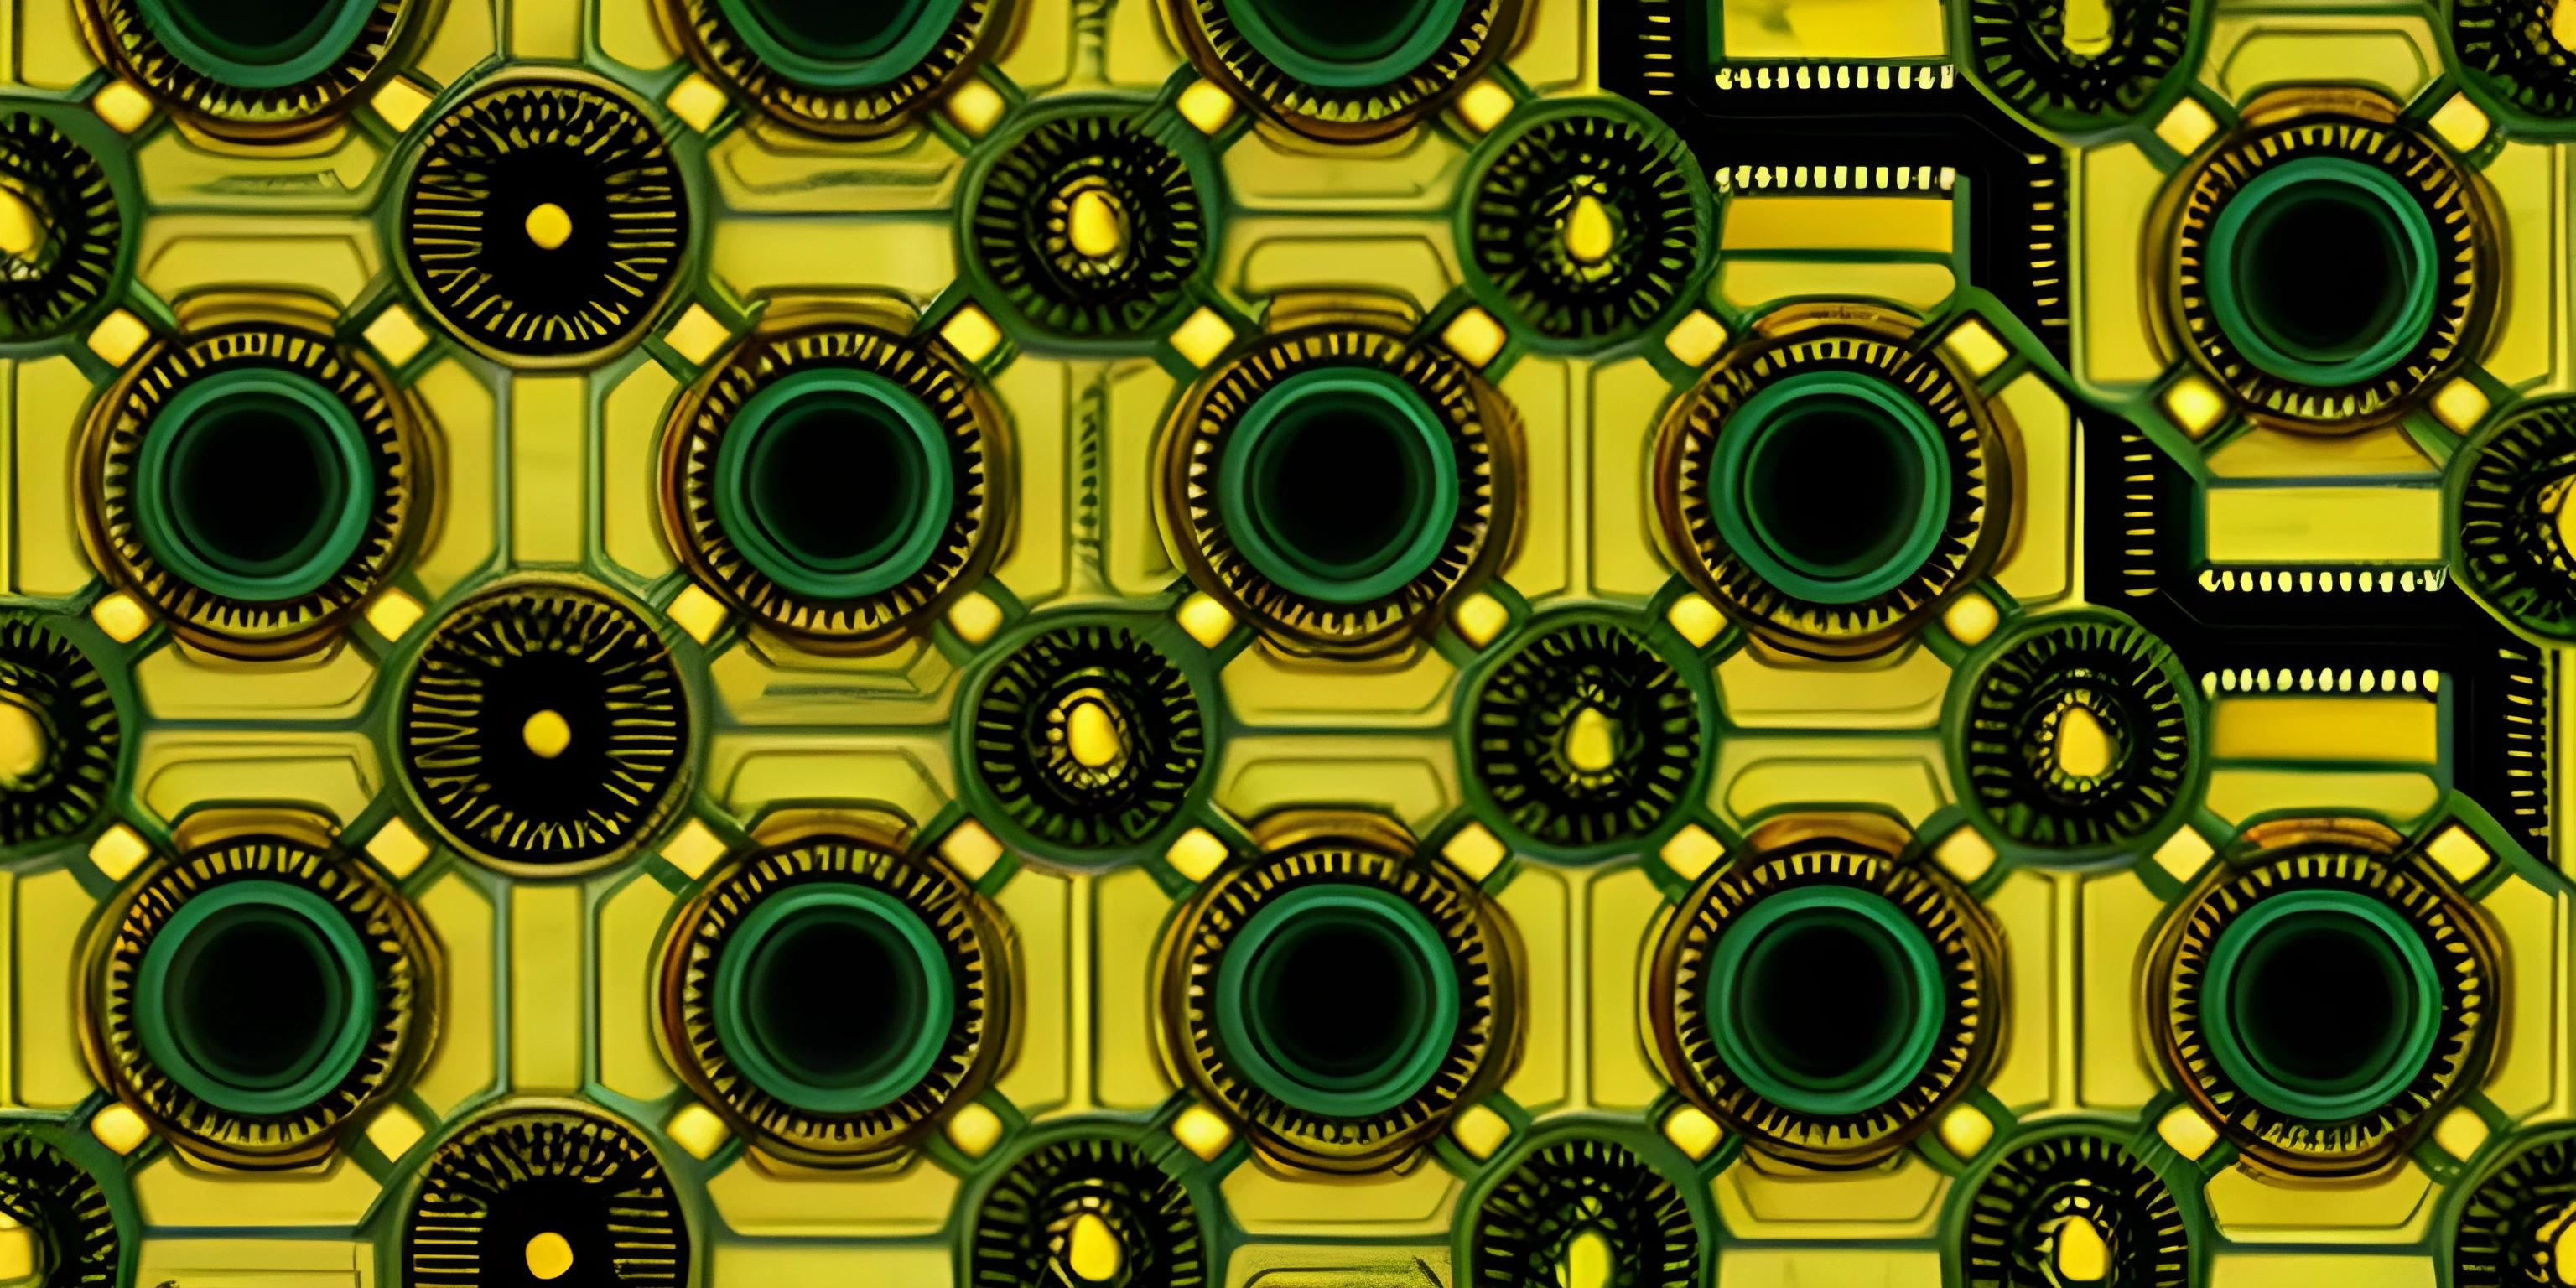 green and yellow shapes in an artistic pattern with a gold background or image on a black wall